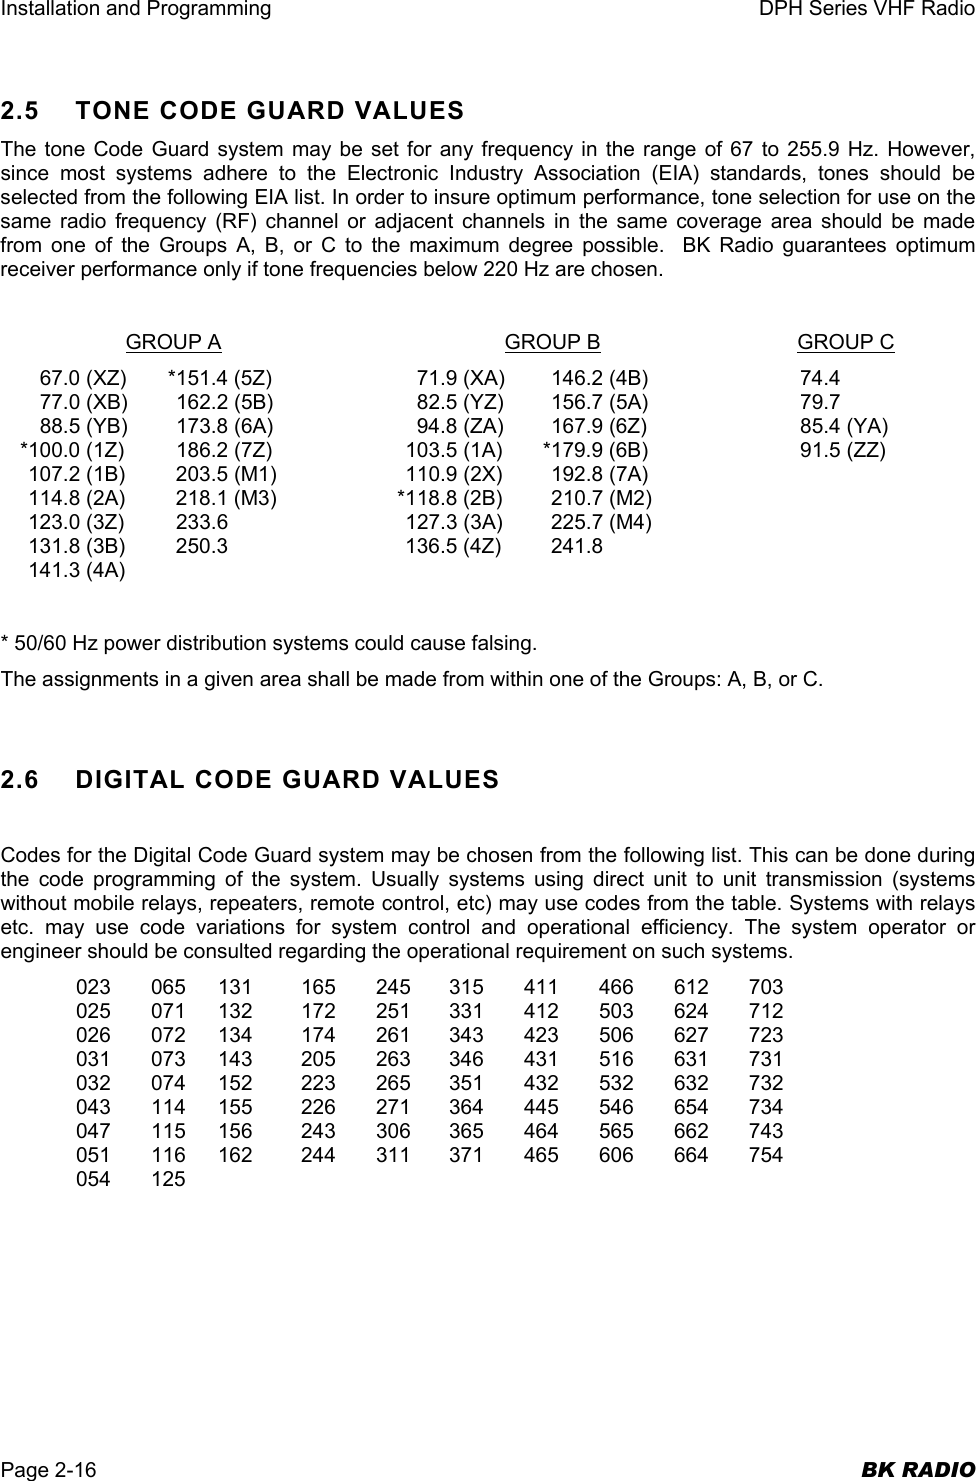 Installation and Programming  DPH Series VHF Radio  Page 2-16  BK RADIO 2.5  TONE CODE GUARD VALUES The tone Code Guard system may be set for any frequency in the range of 67 to 255.9 Hz. However, since most systems adhere to the Electronic Industry Association (EIA) standards, tones should be selected from the following EIA list. In order to insure optimum performance, tone selection for use on the same radio frequency (RF) channel or adjacent channels in the same coverage area should be made from one of the Groups A, B, or C to the maximum degree possible.  BK Radio guarantees optimum receiver performance only if tone frequencies below 220 Hz are chosen.   GROUP A GROUP B GROUP C   67.0 (XZ)  *151.4 (5Z)  71.9 (XA)  146.2 (4B)  74.4   77.0 (XB)  162.2 (5B)  82.5 (YZ)  156.7 (5A)  79.7   88.5 (YB)  173.8 (6A)  94.8 (ZA)  167.9 (6Z)  85.4 (YA)   *100.0 (1Z)  186.2 (7Z)  103.5 (1A)  *179.9 (6B)  91.5 (ZZ)   107.2 (1B)  203.5 (M1)  110.9 (2X)  192.8 (7A)   114.8 (2A)  218.1 (M3)  *118.8 (2B)  210.7 (M2)   123.0 (3Z)  233.6  127.3 (3A)  225.7 (M4)   131.8 (3B)  250.3  136.5 (4Z)  241.8  141.3 (4A)  * 50/60 Hz power distribution systems could cause falsing. The assignments in a given area shall be made from within one of the Groups: A, B, or C.  2.6 DIGITAL CODE GUARD VALUES  Codes for the Digital Code Guard system may be chosen from the following list. This can be done during the code programming of the system. Usually systems using direct unit to unit transmission (systems without mobile relays, repeaters, remote control, etc) may use codes from the table. Systems with relays etc. may use code variations for system control and operational efficiency. The system operator or engineer should be consulted regarding the operational requirement on such systems.   023 065 131  165 245 315 411 466 612 703   025 071 132  172 251 331 412 503 624 712   026 072 134  174 261 343 423 506 627 723   031 073 143  205 263 346 431 516 631 731   032 074 152  223 265 351 432 532 632 732   043 114 155  226 271 364 445 546 654 734   047 115 156  243 306 365 464 565 662 743   051 116 162  244 311 371 465 606 664 754  054 125 